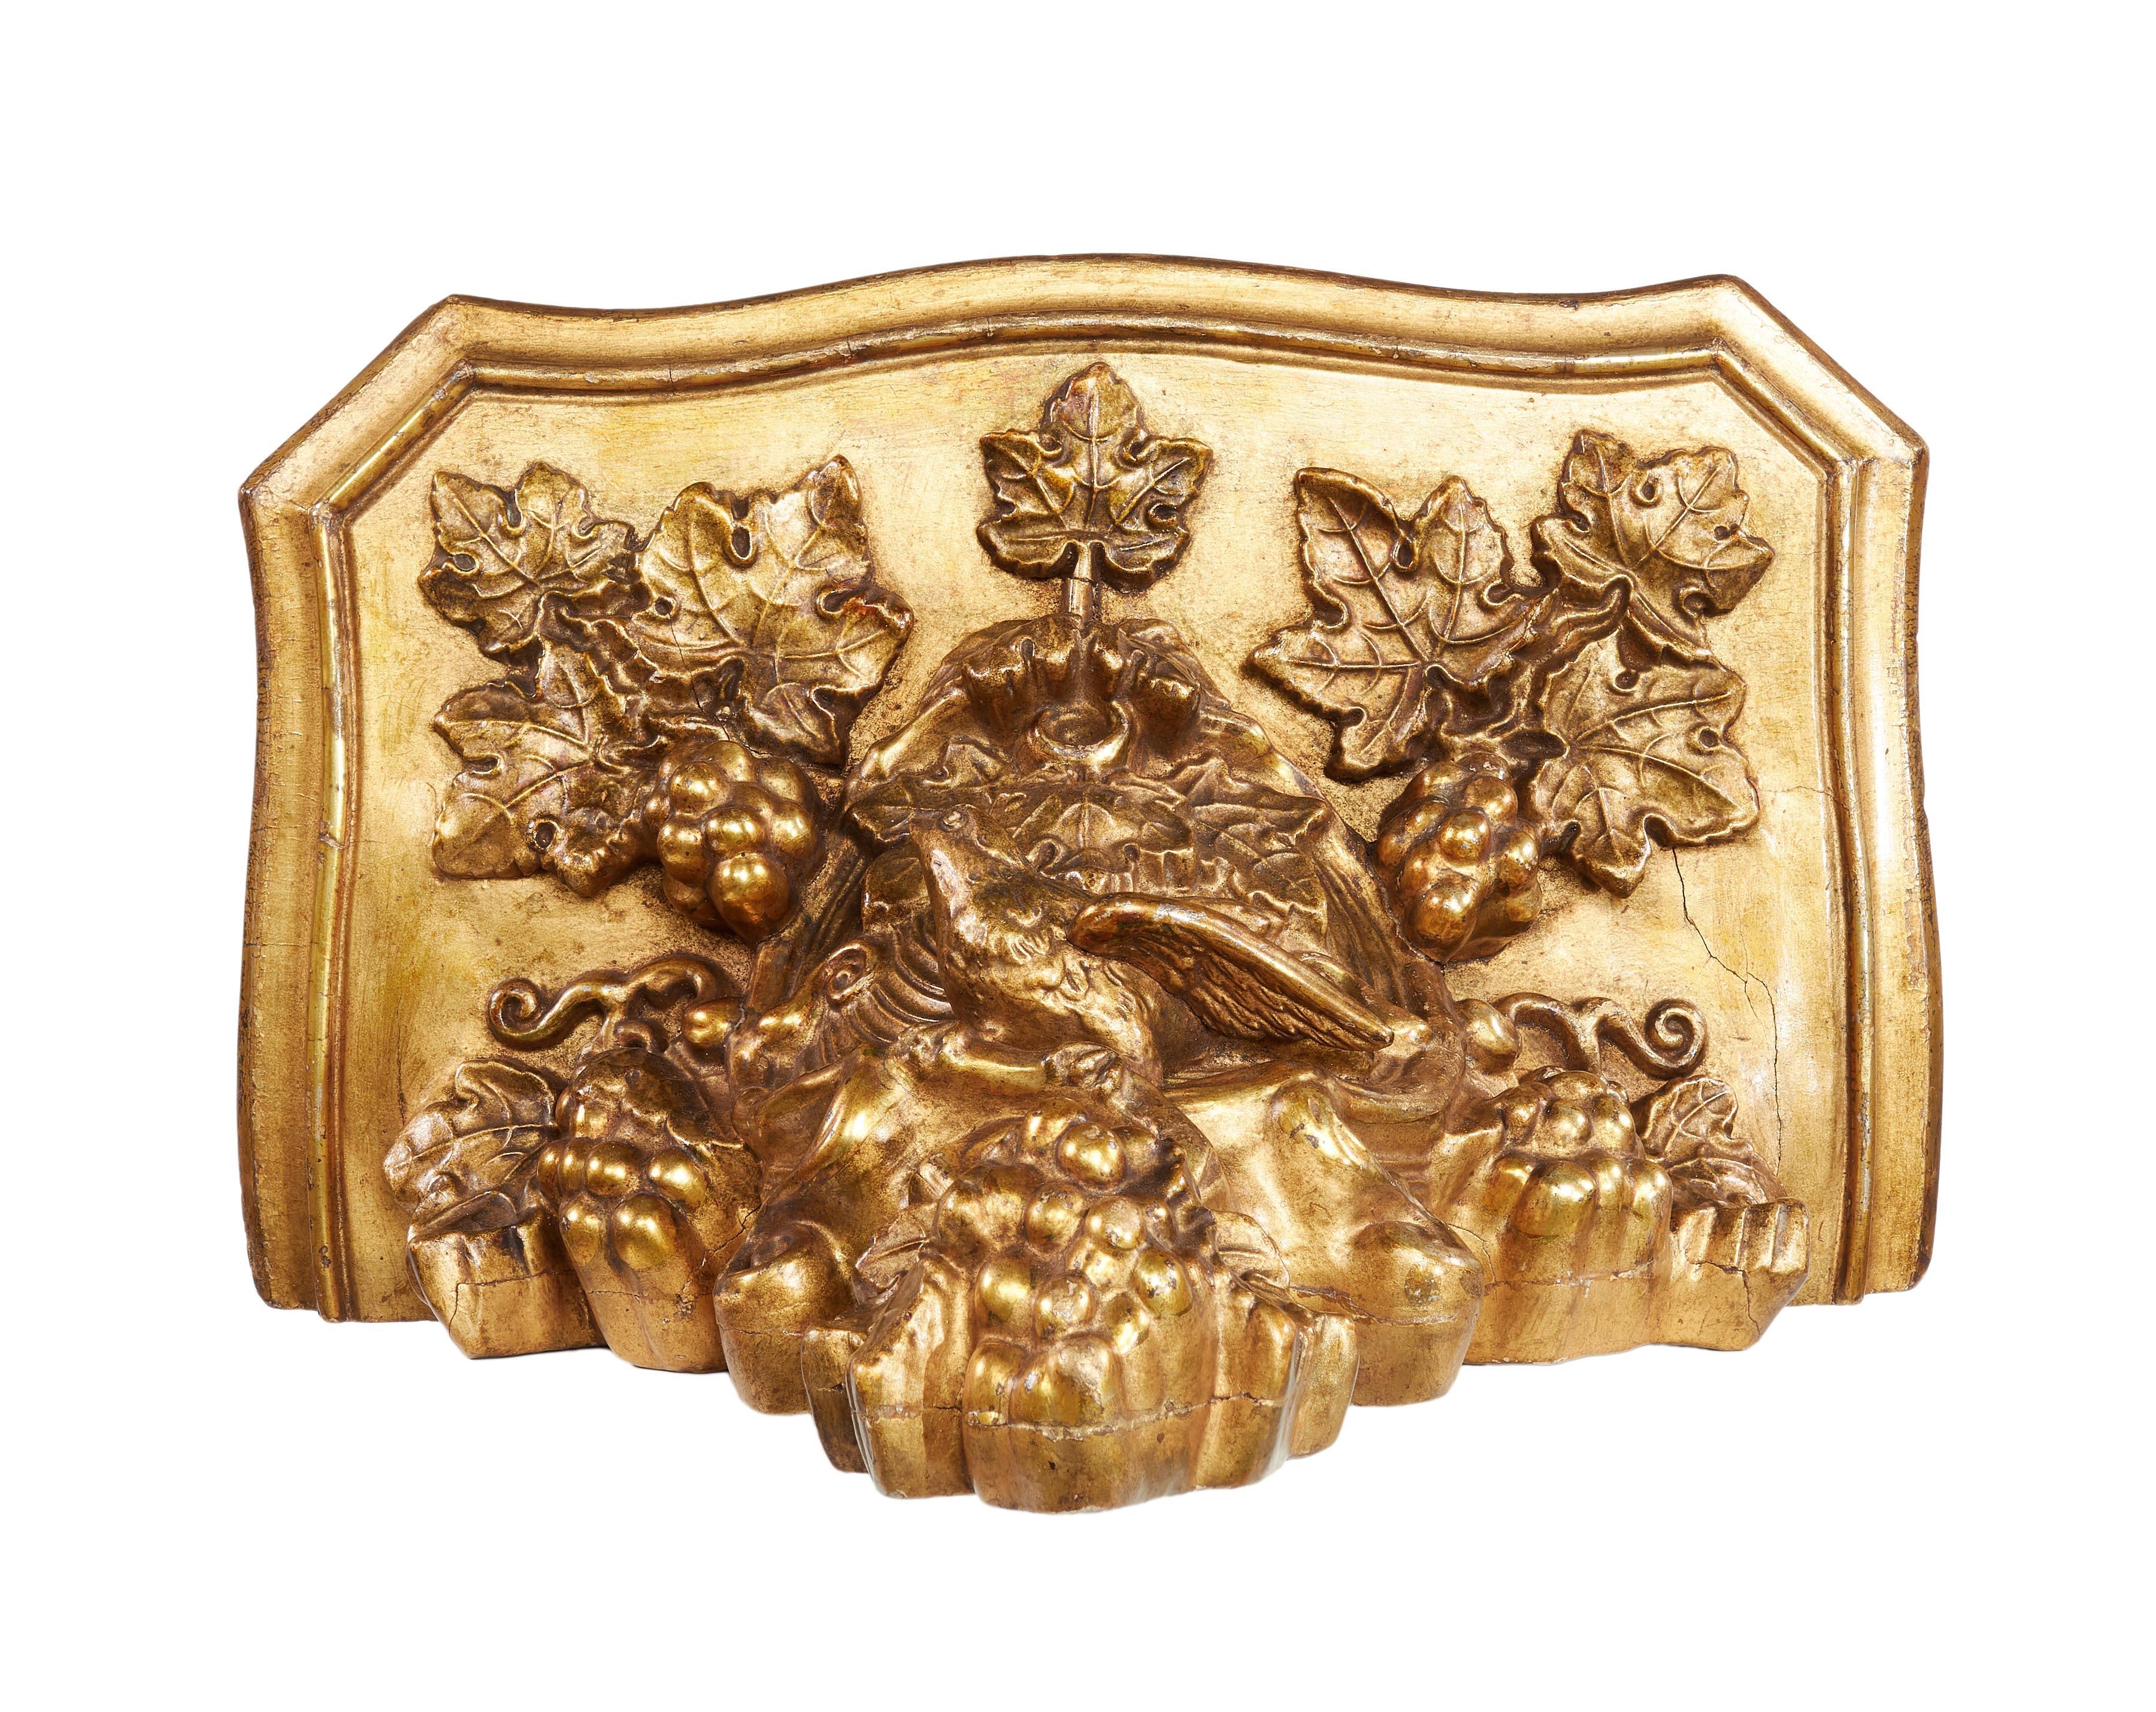 The bracket has a serpentine shaped top above a bird in it’s nest surrounded by bunches of grapes and vine leaves.
 